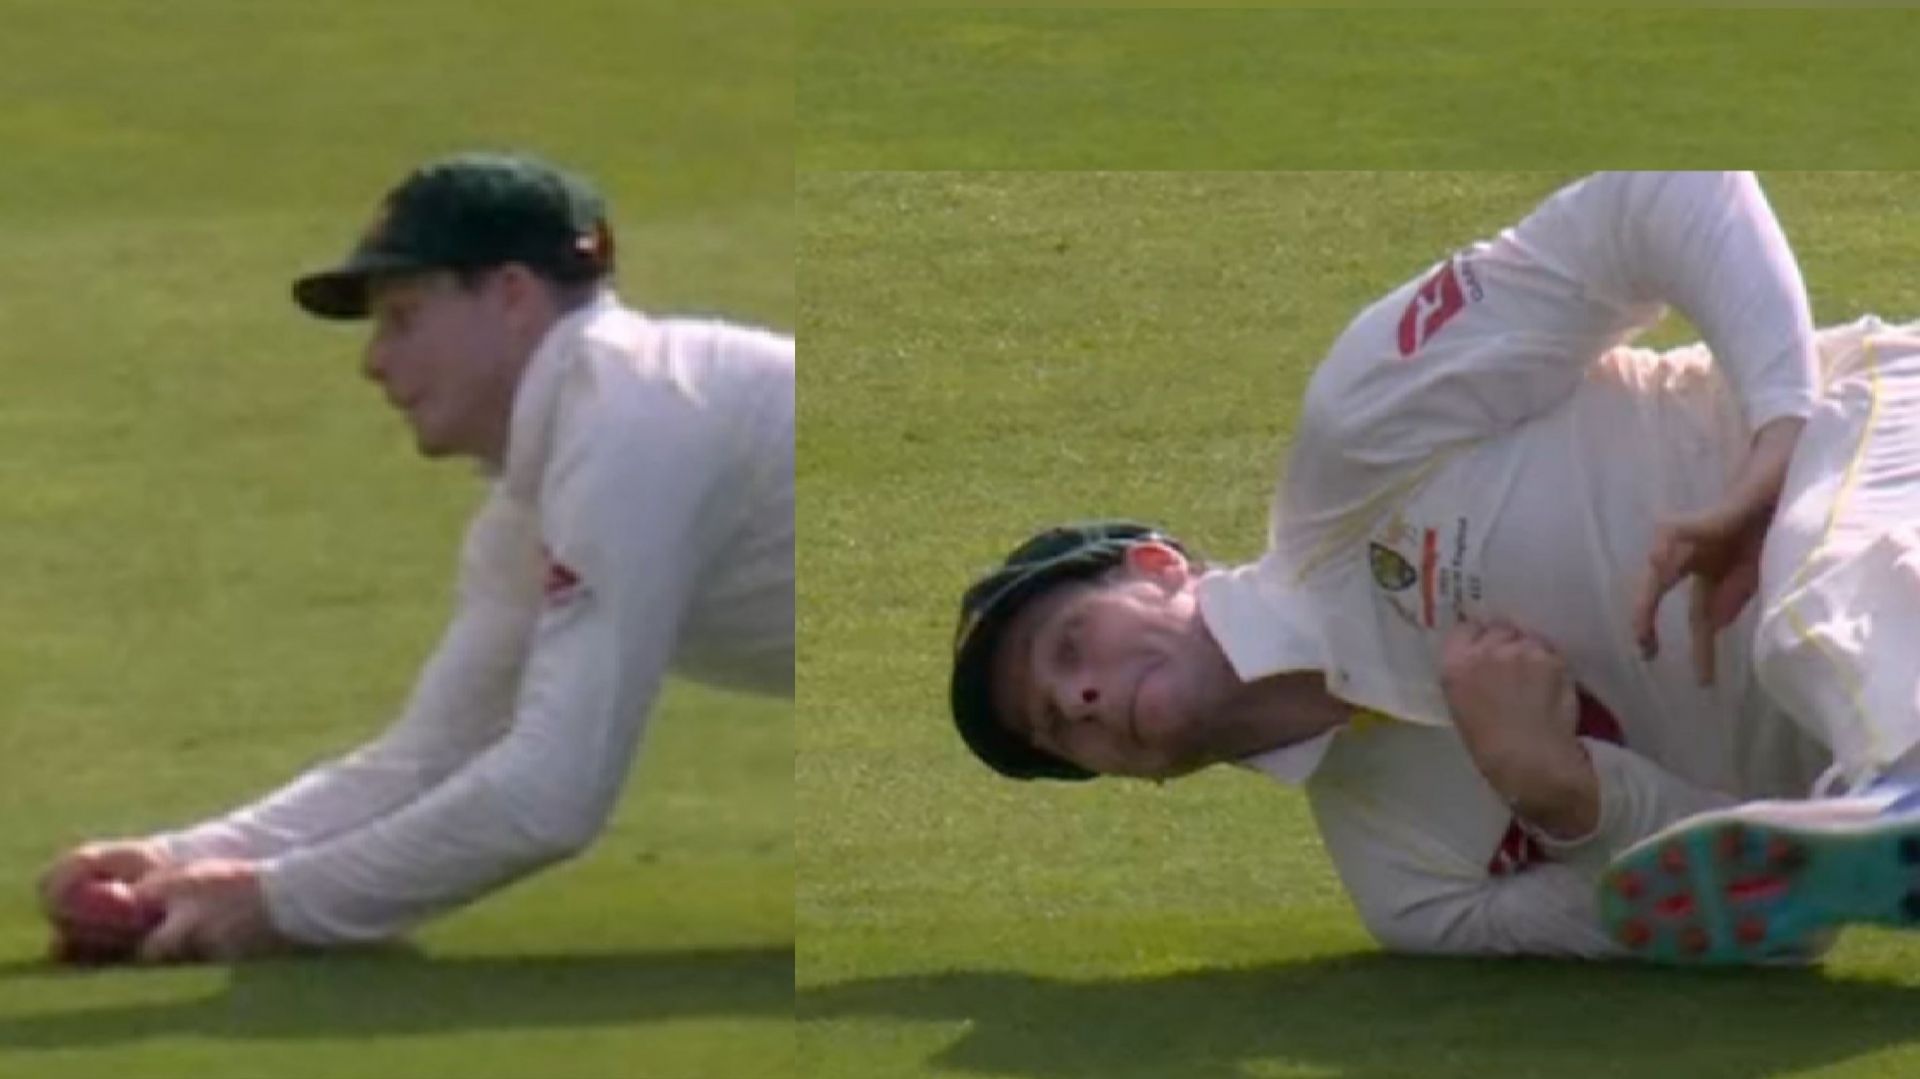 Steve Smith took a brilliant diving catch (Image: Twitter/Sony)